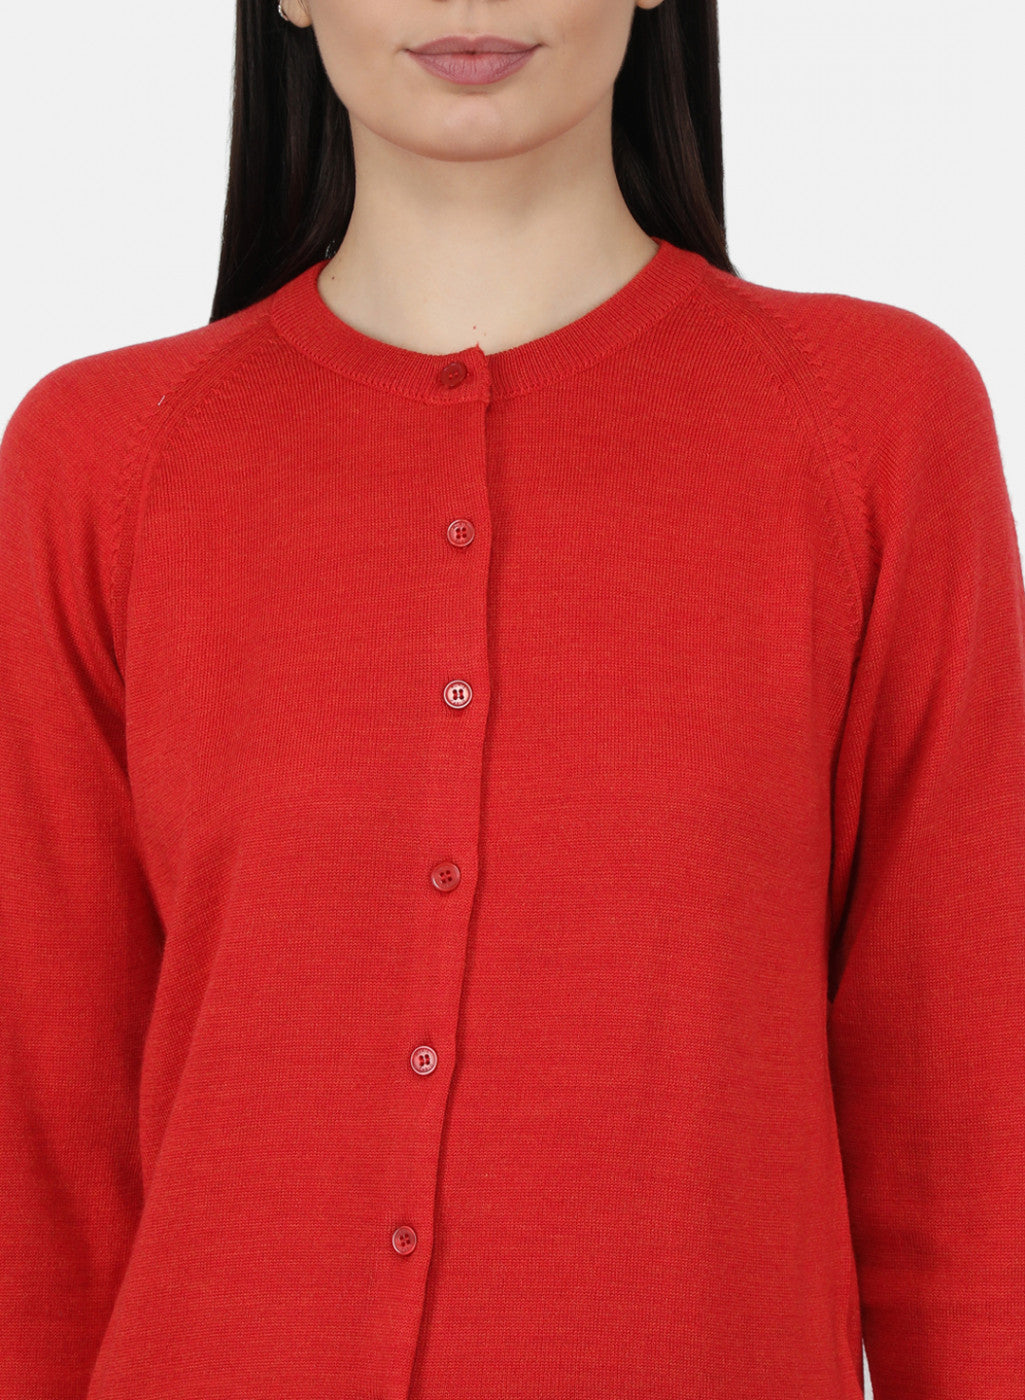 Women Red Solid Cardigan